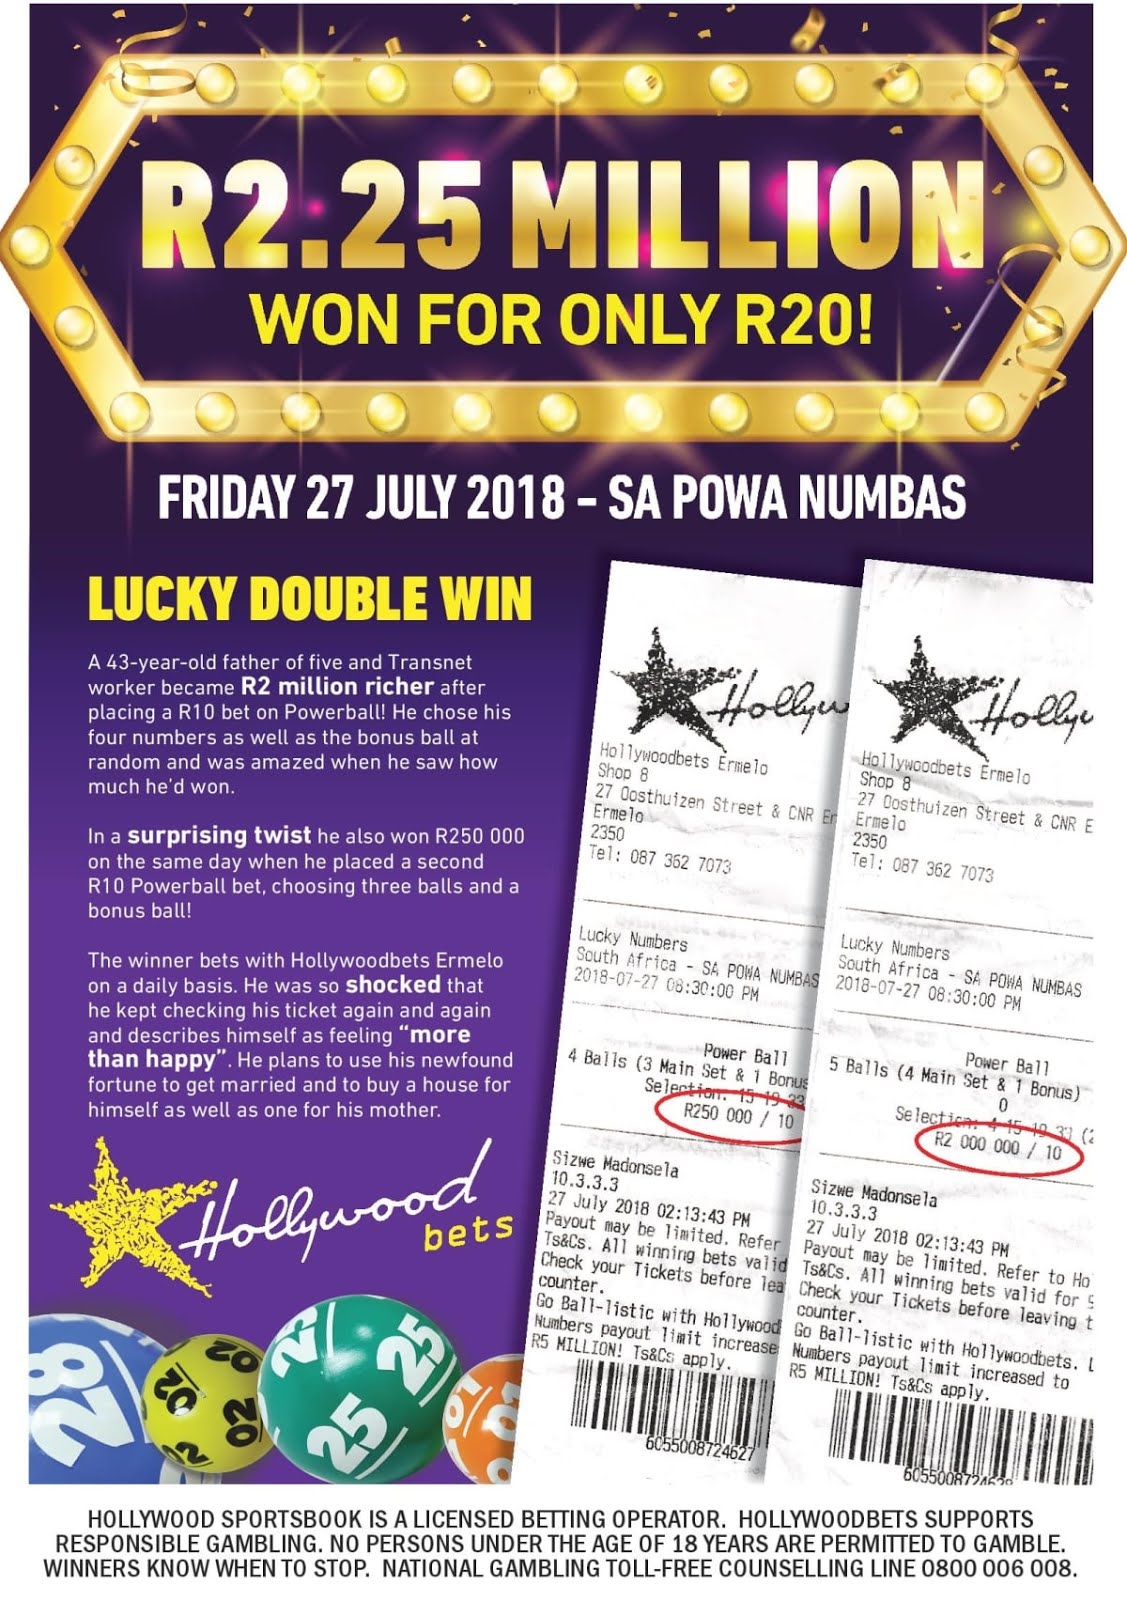 Hollywoodbets customer wins R2.25 Million with just R20! Betting on SA Powa Numbas. 27 July 2018.